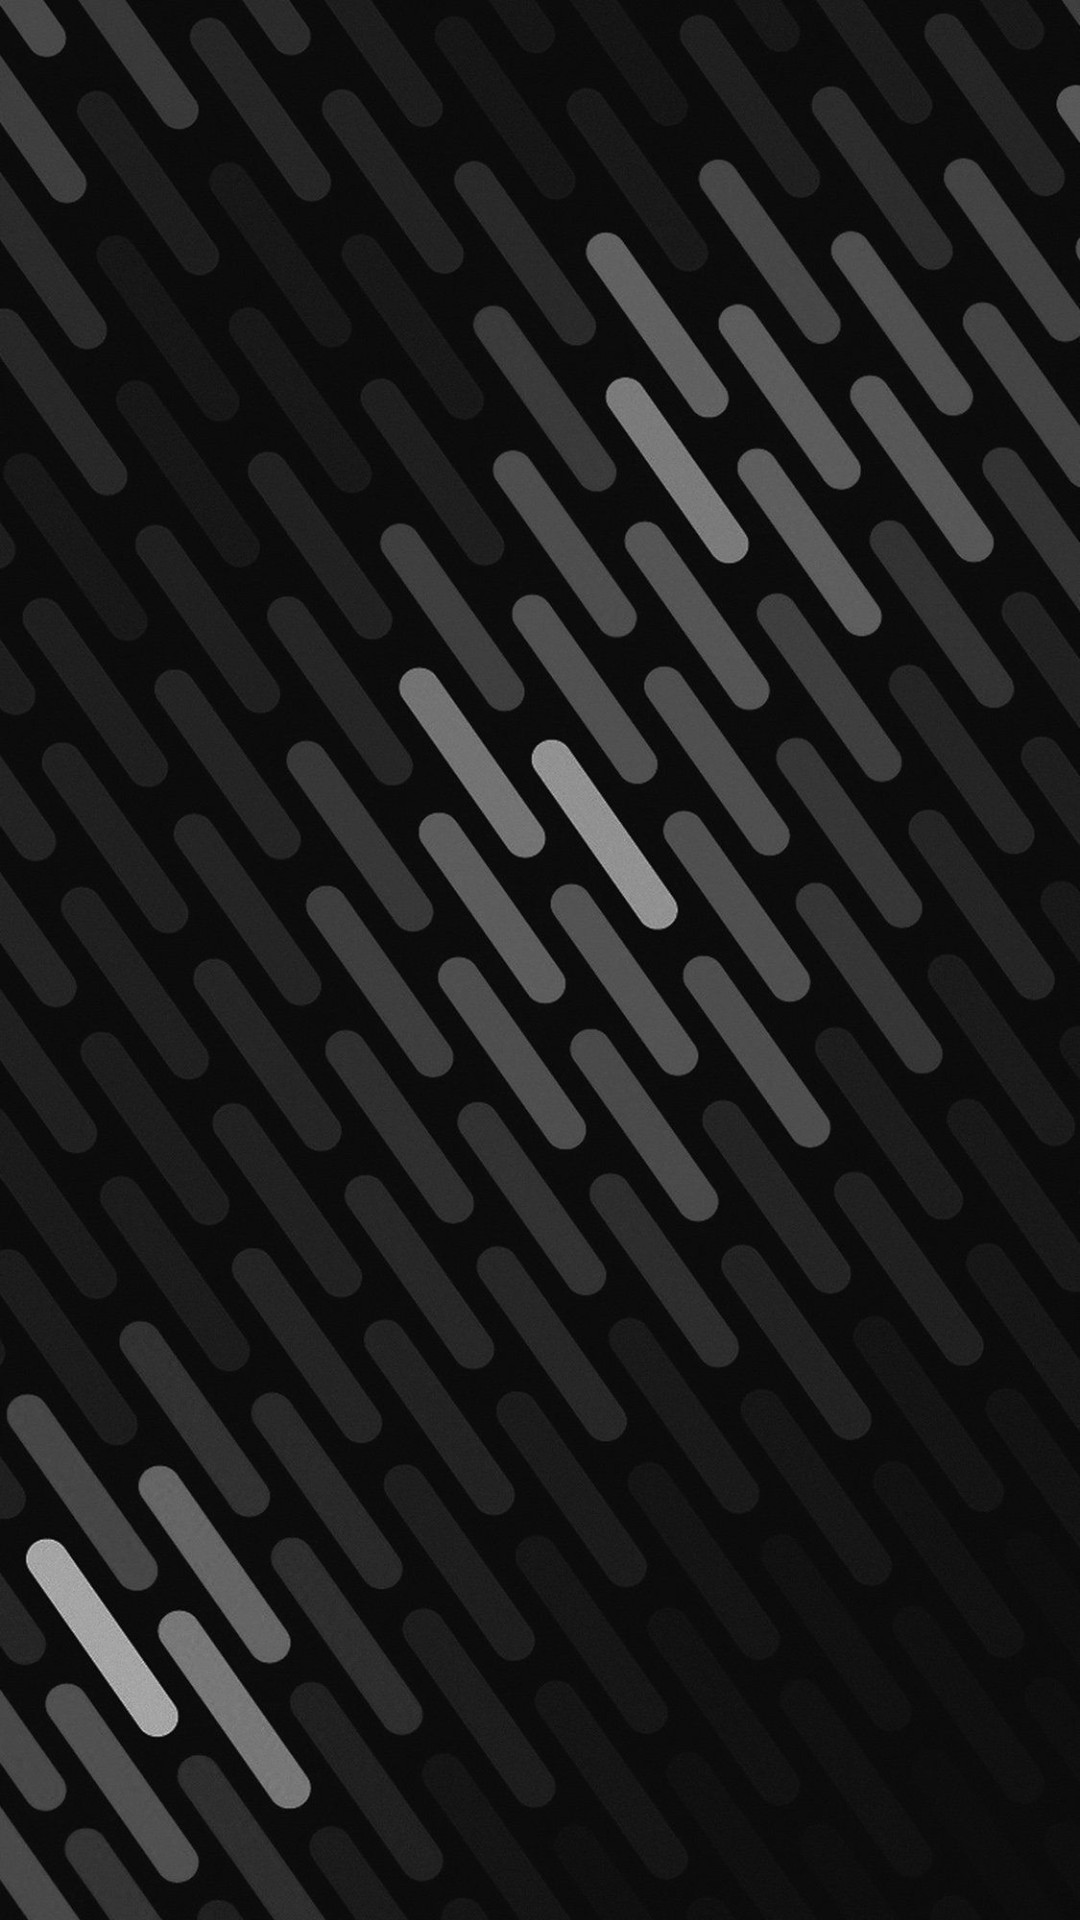 Black and Grey iPhone Wallpaper Black and Grey iPhone Wallpaper